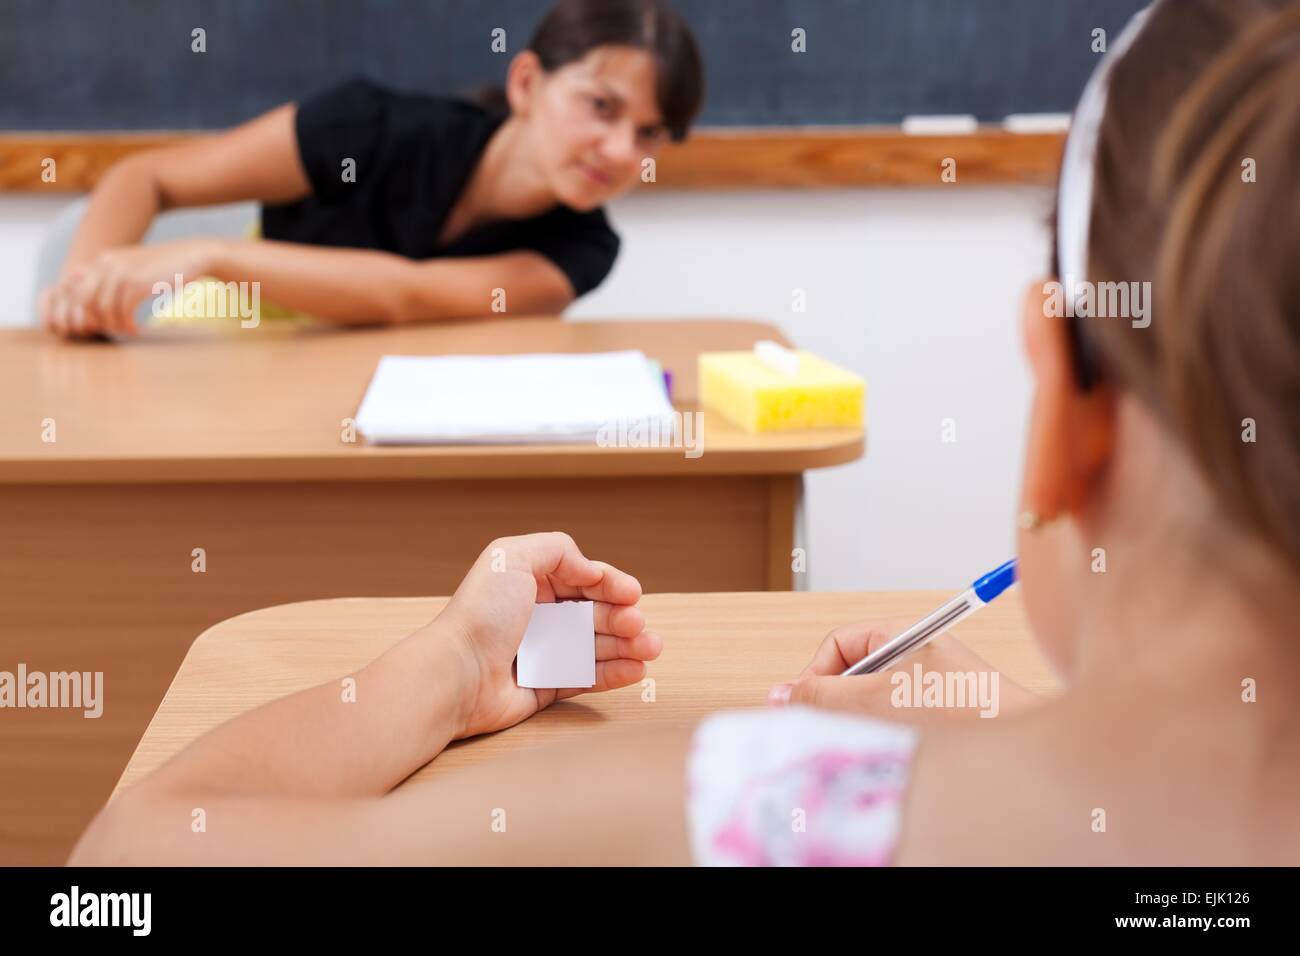 Student cheating while writing test, teacher is looking at her Stock Photo